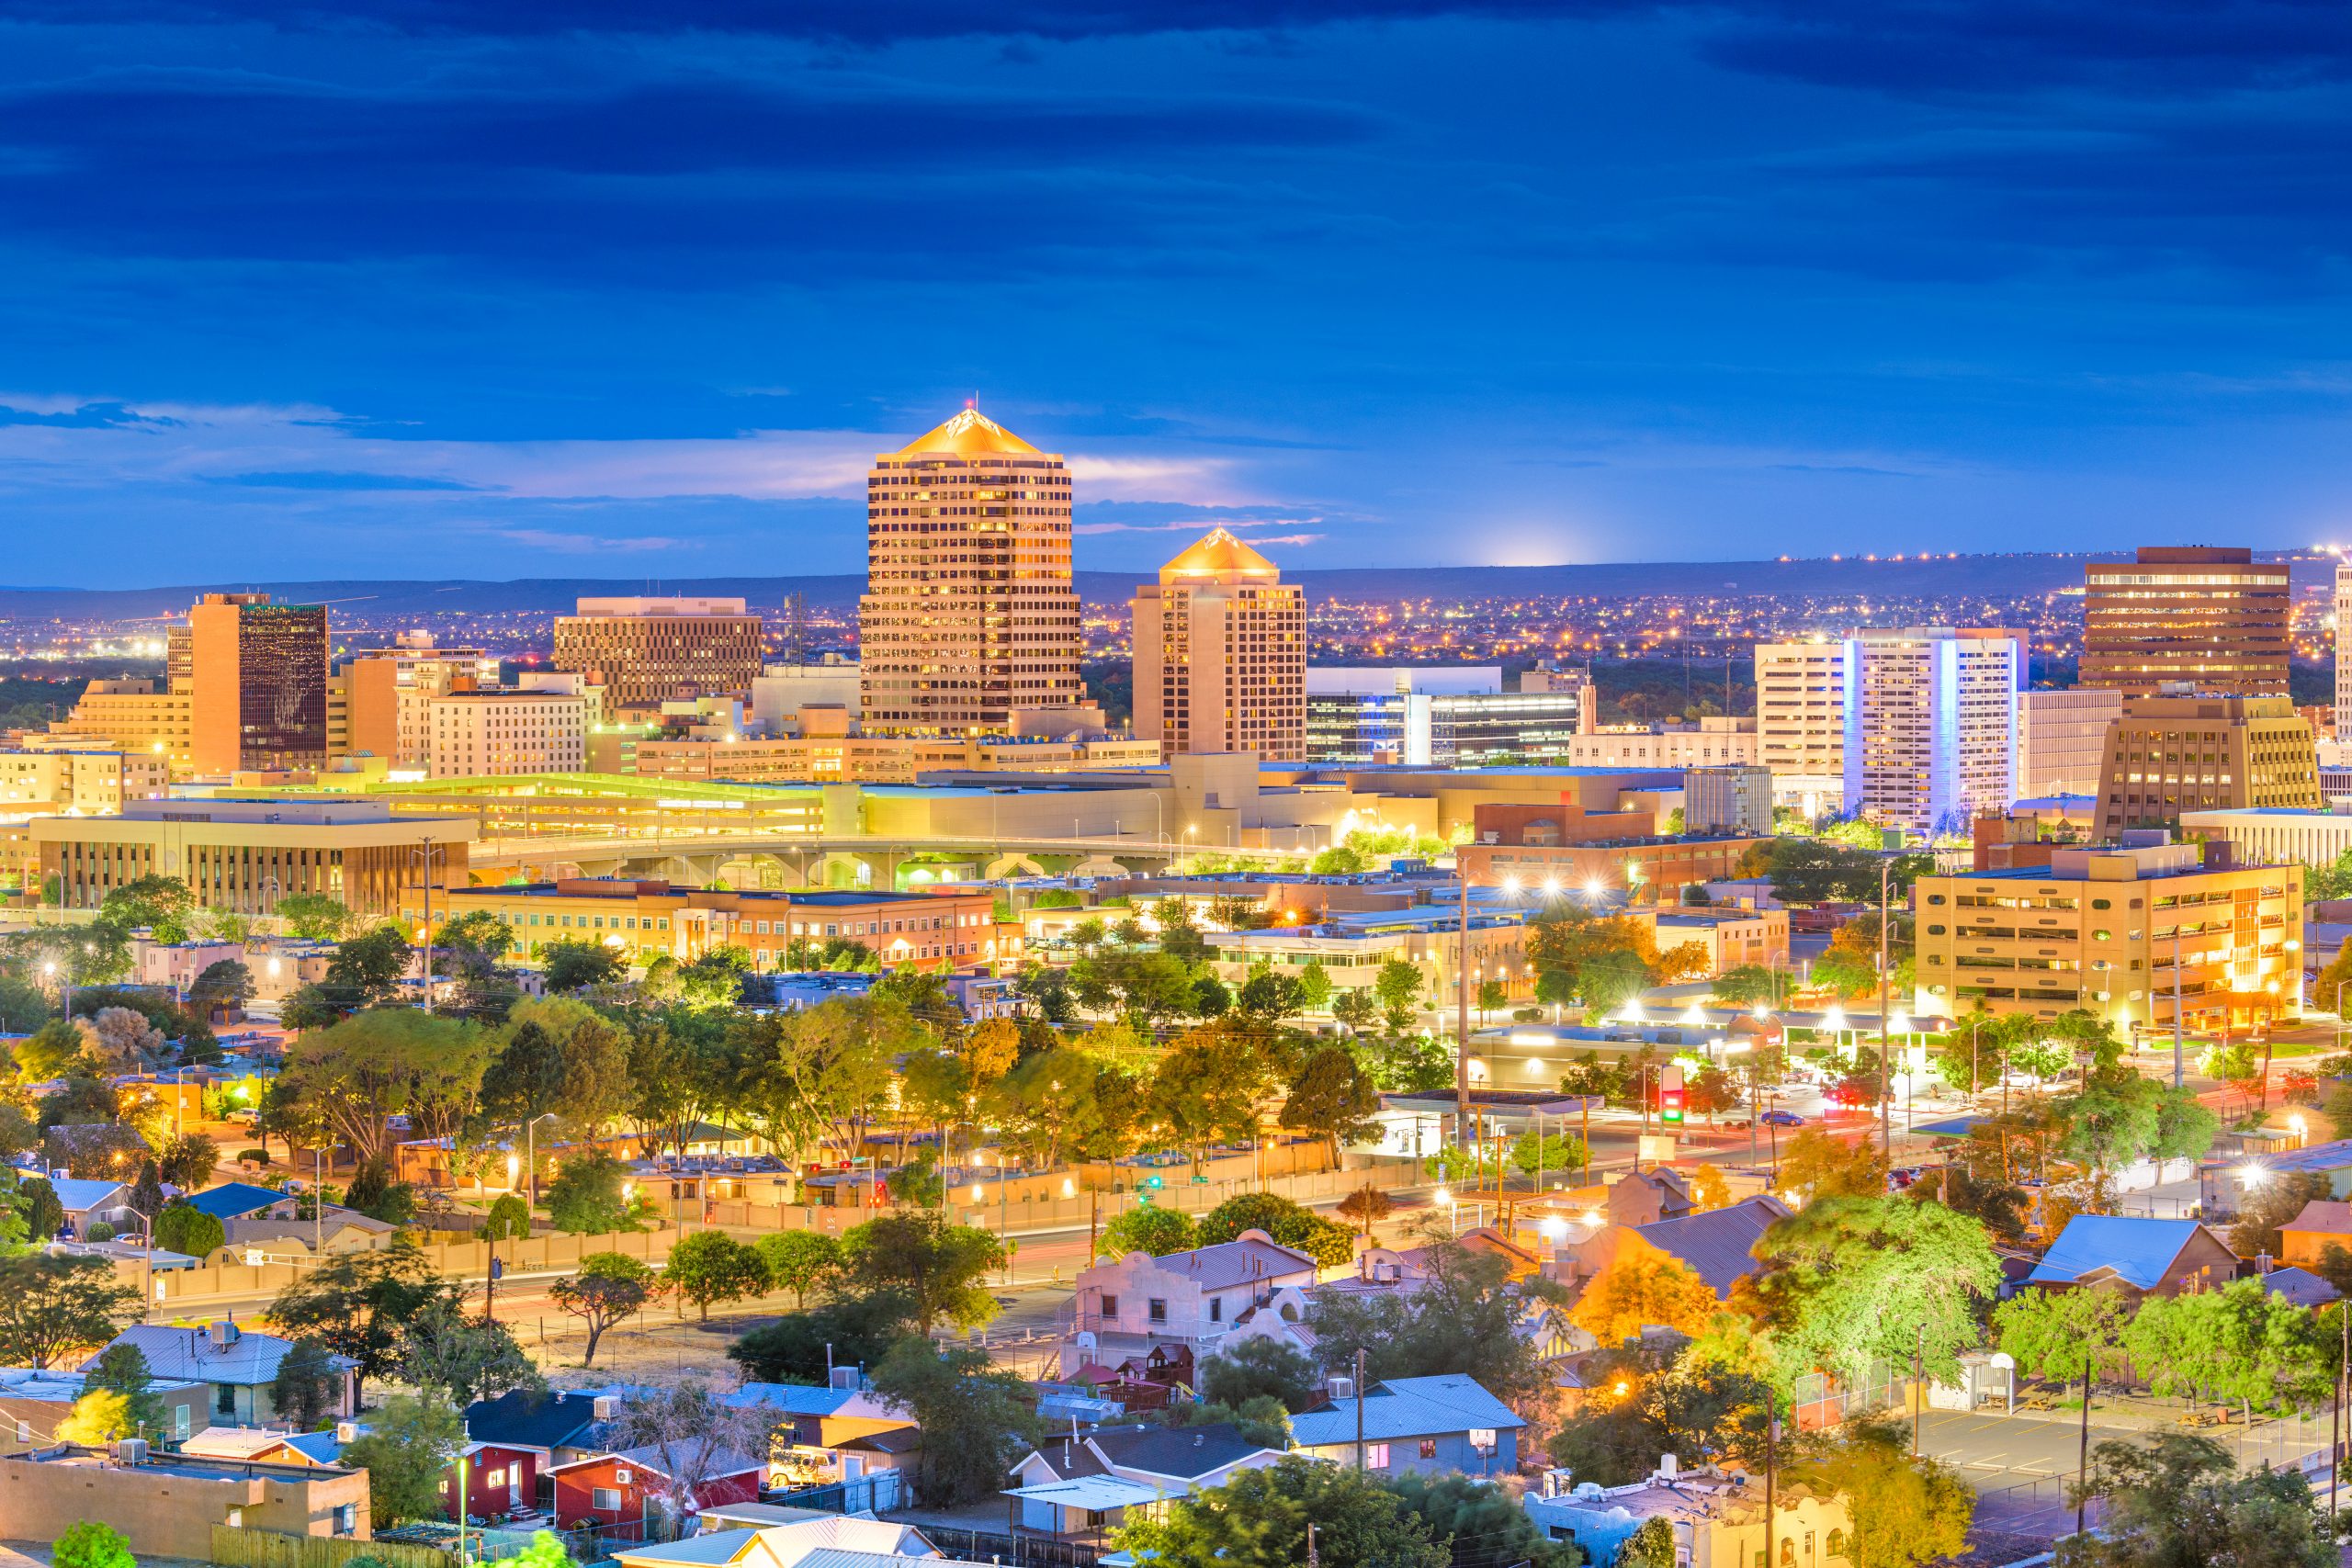 The beautiful Downtown Albuquerque, New, Mexico, skyline captured at twilight.